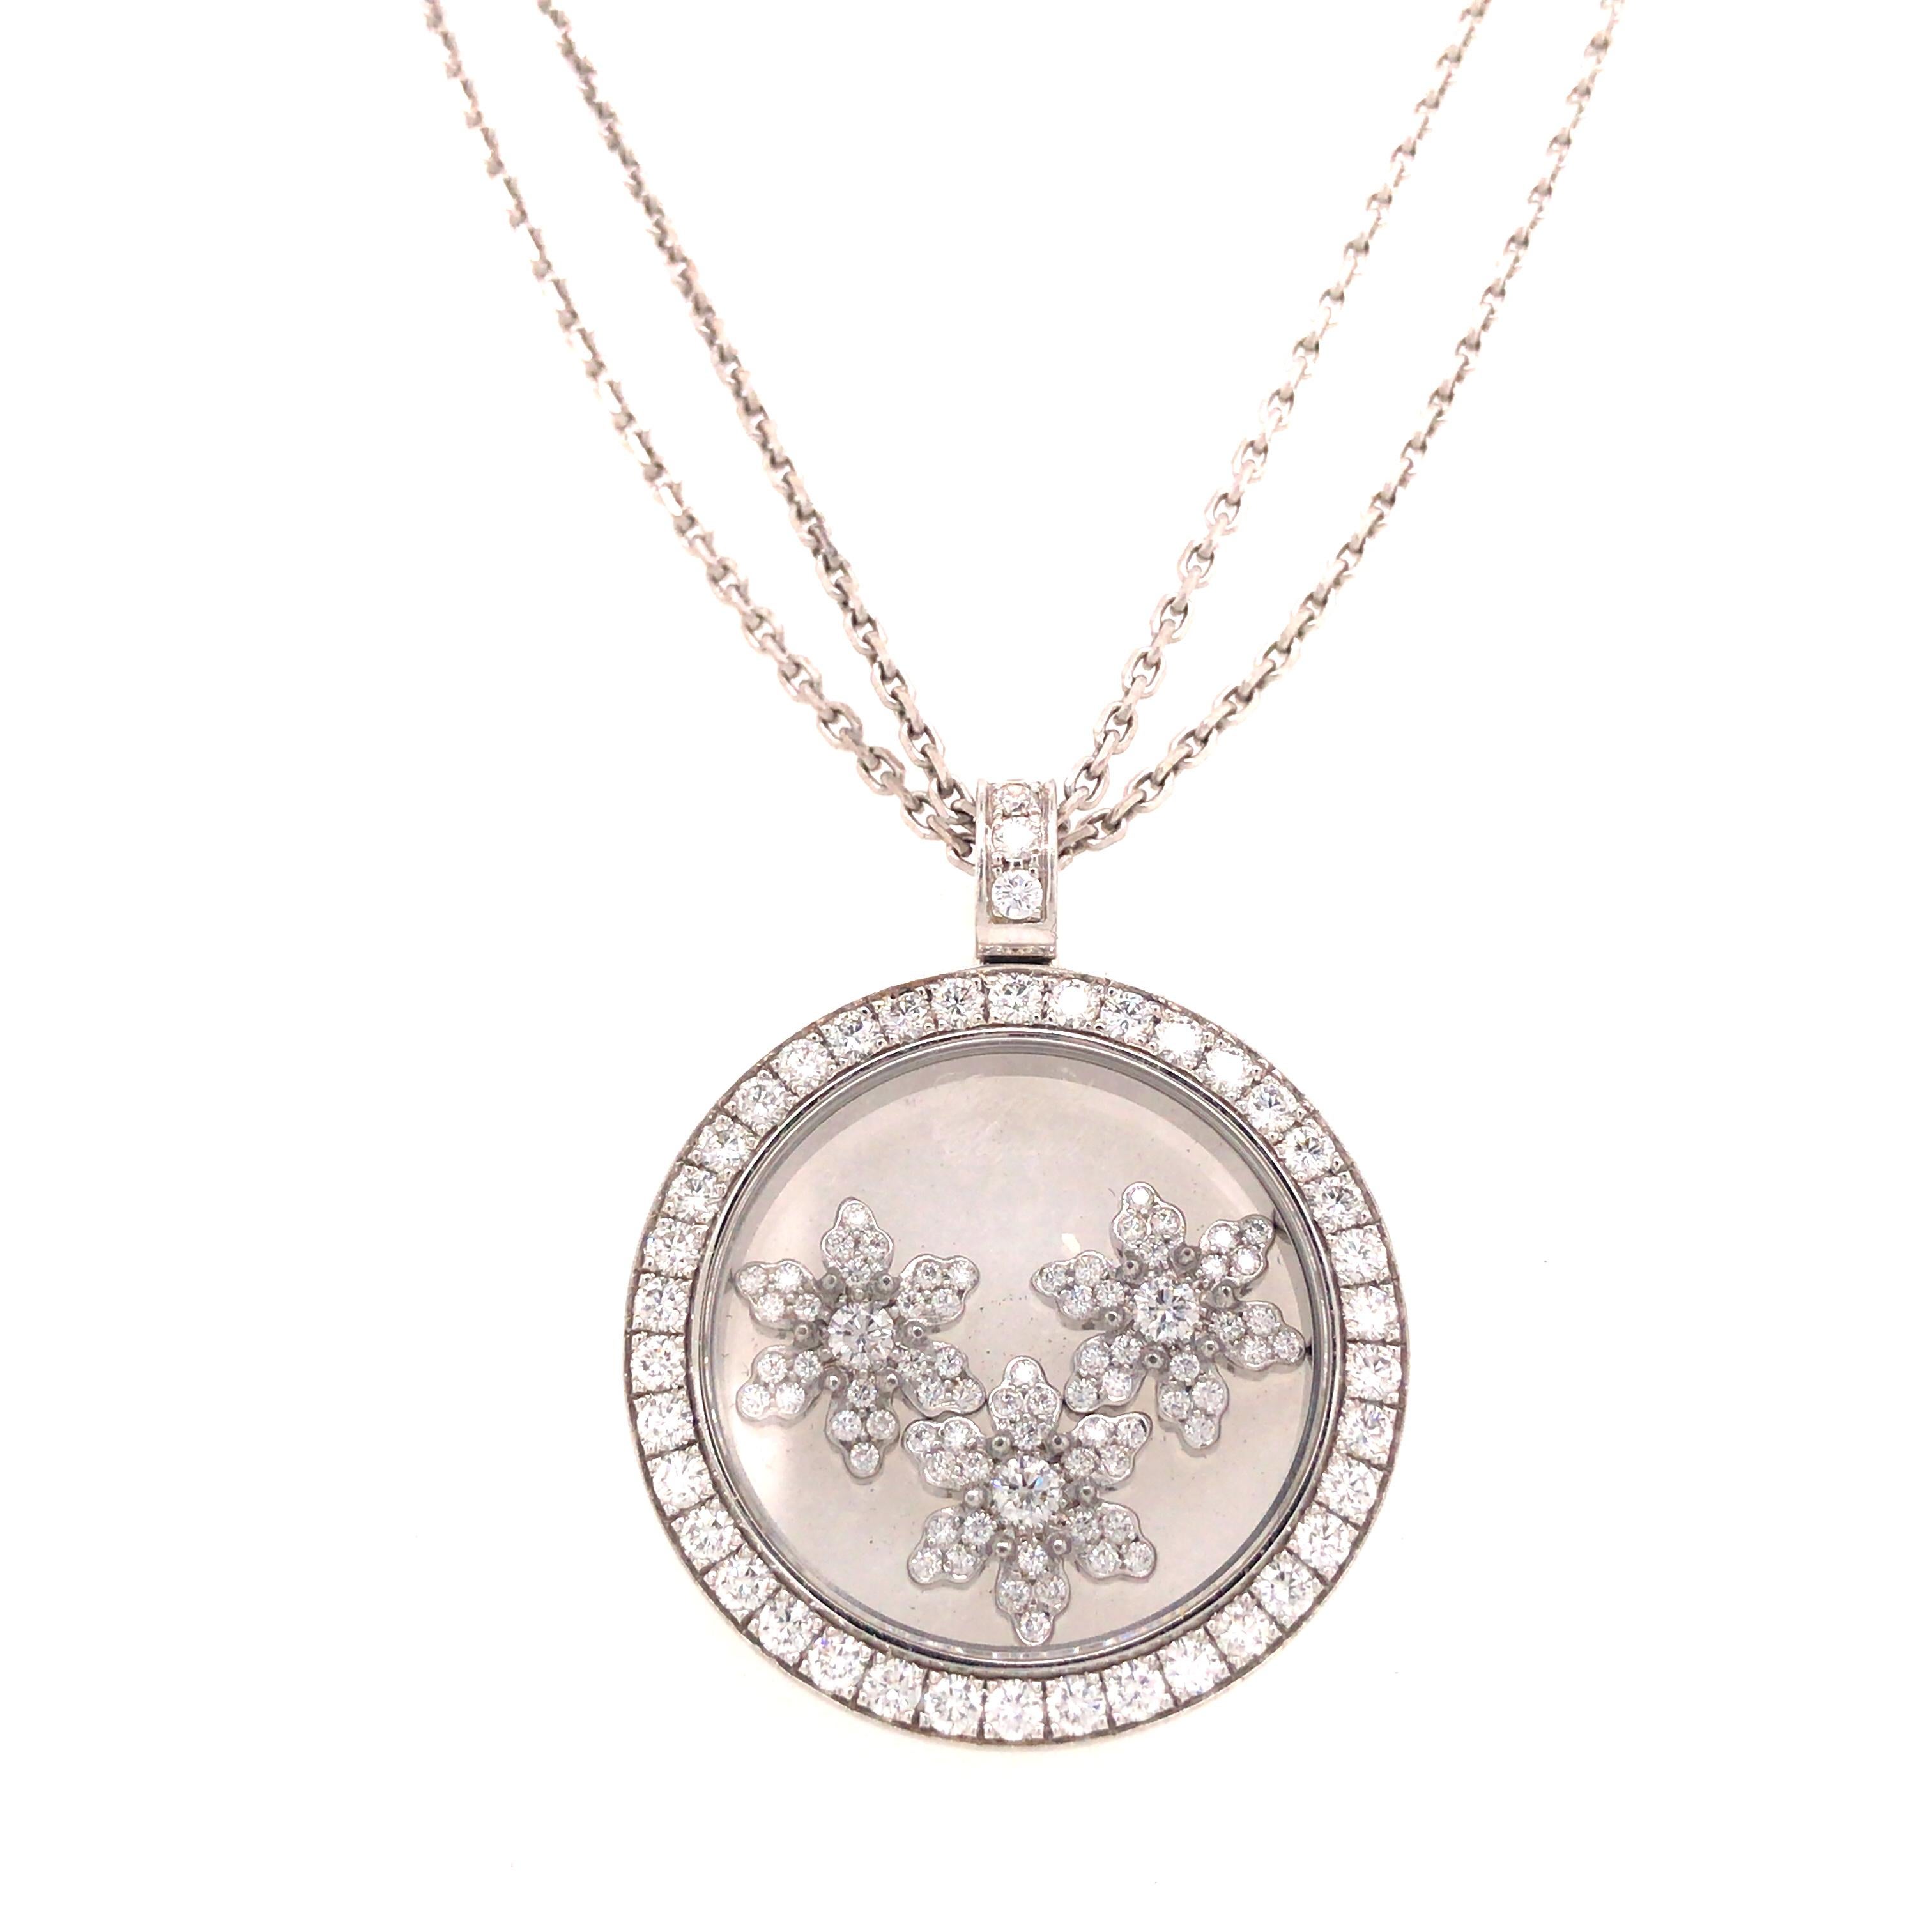 Chopard Happy Sport Snowflakes Pendant Double Strand Necklace in 18K White Gold.  Round Brilliant Cut Diamonds weighing 0.96 carat total weight E-F in color and VS in clarity are expertly set.  The Pendant measures 1 inch in diameter and hangs on a